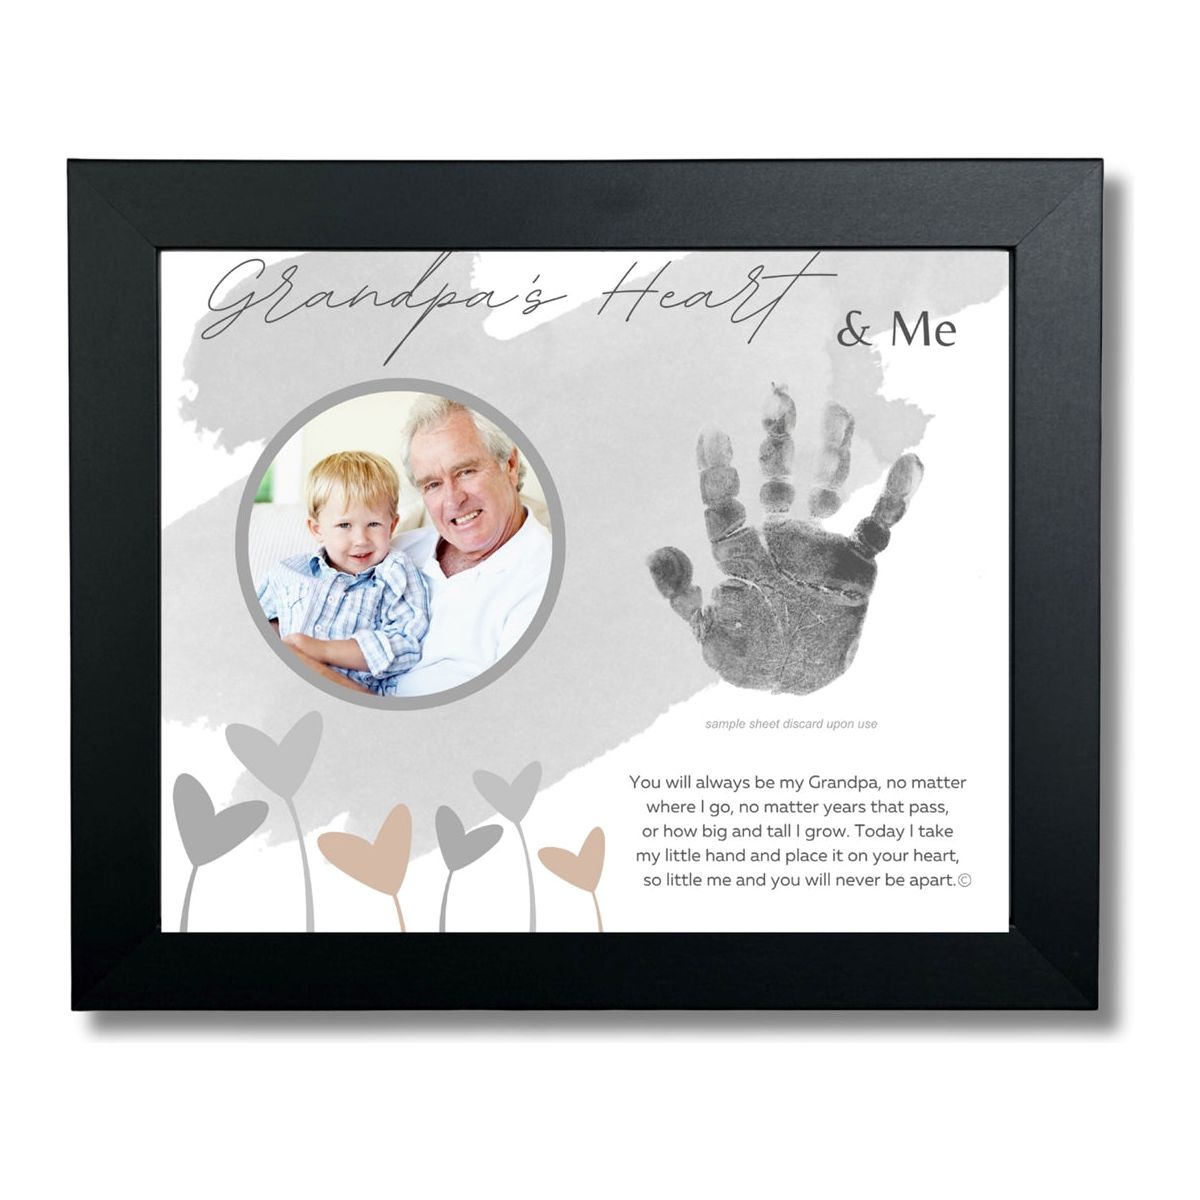 8x10 black frame with &quot;Grandpa&#39;s Heart &amp; Me&quot; artwork with poem, space for a handprint, and a circular opening for a photograph.